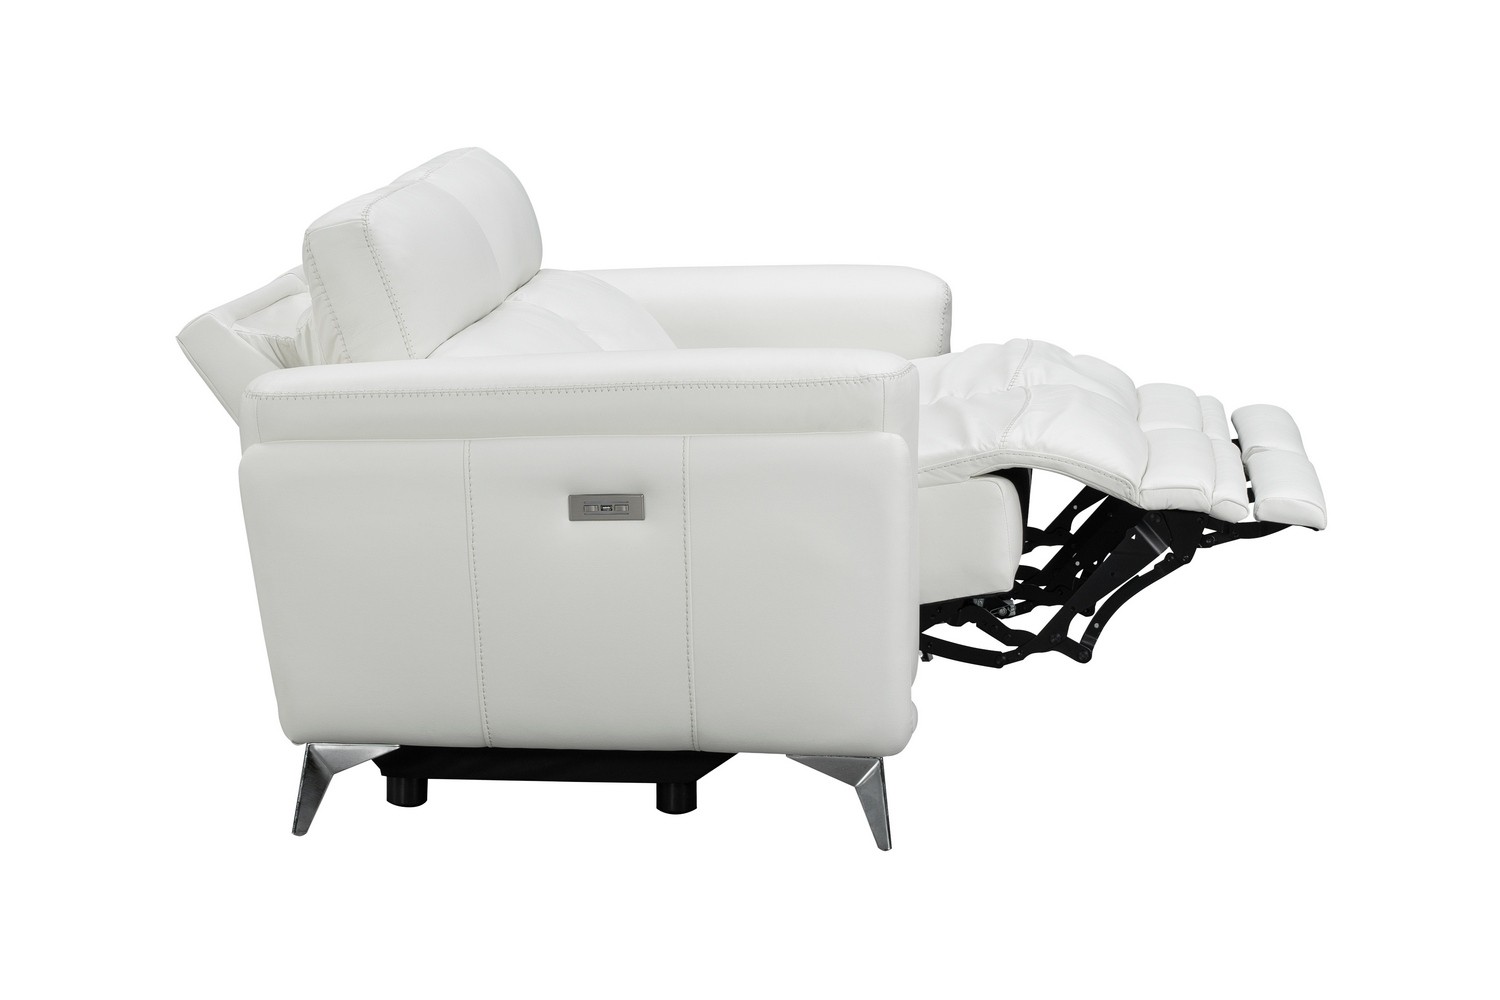 Barcalounger Cameron Power Reclining Loveseat with Power Head Rests - Enzo Winter White/Leather Match